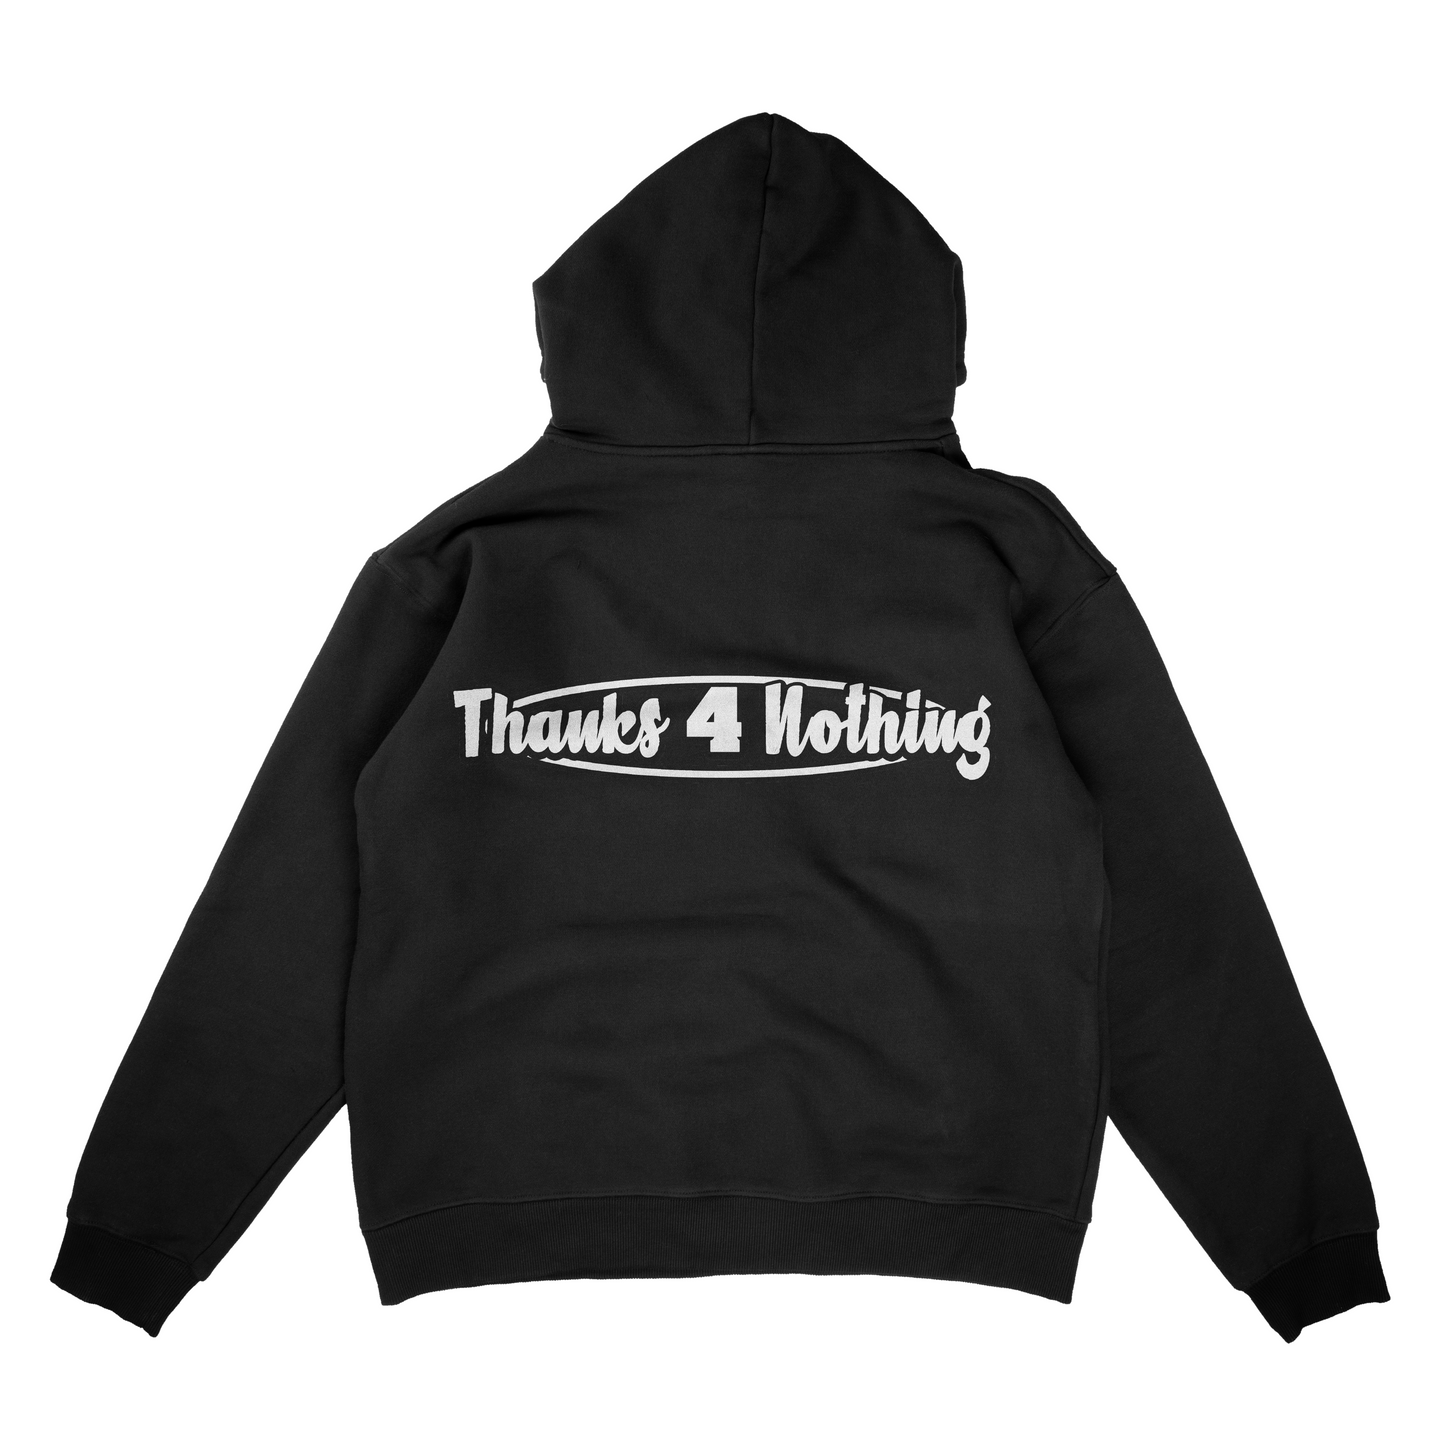 "Thanks 4 Nothing Hoodie" GraveWay Apparel Fall 2023 Ready-to-Wear Collection